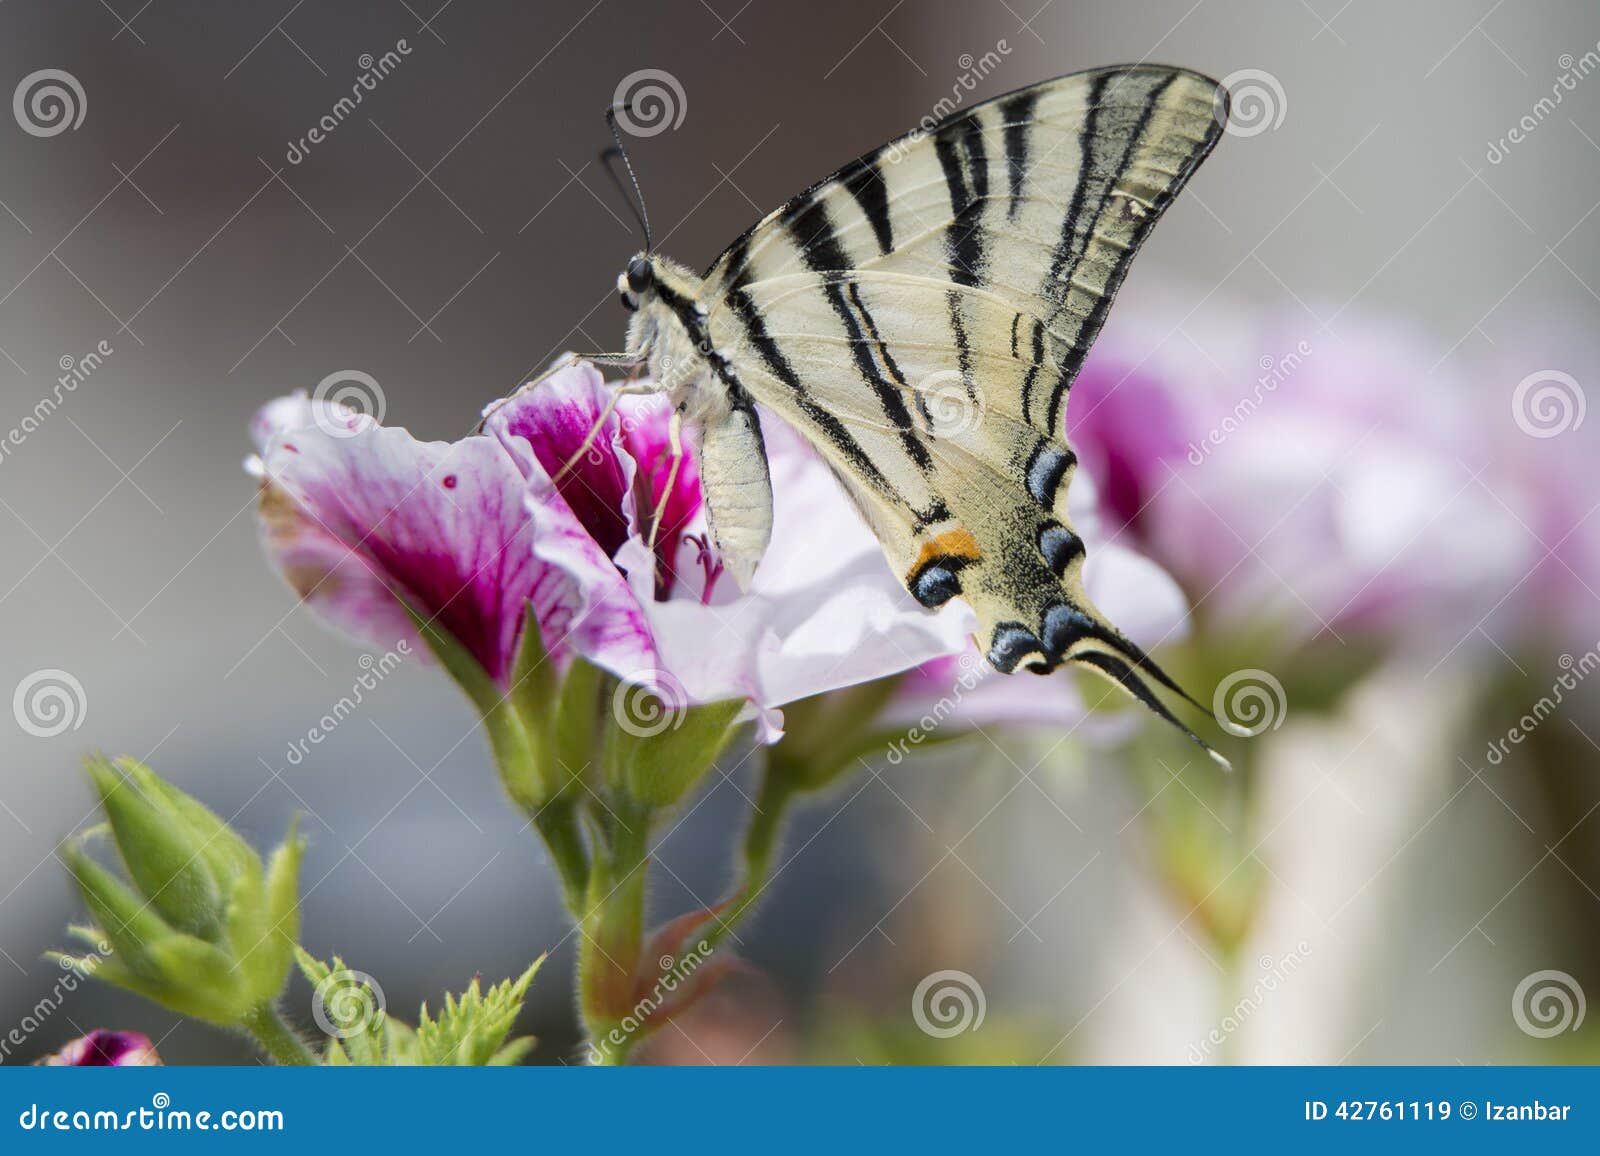 macaon butterfly